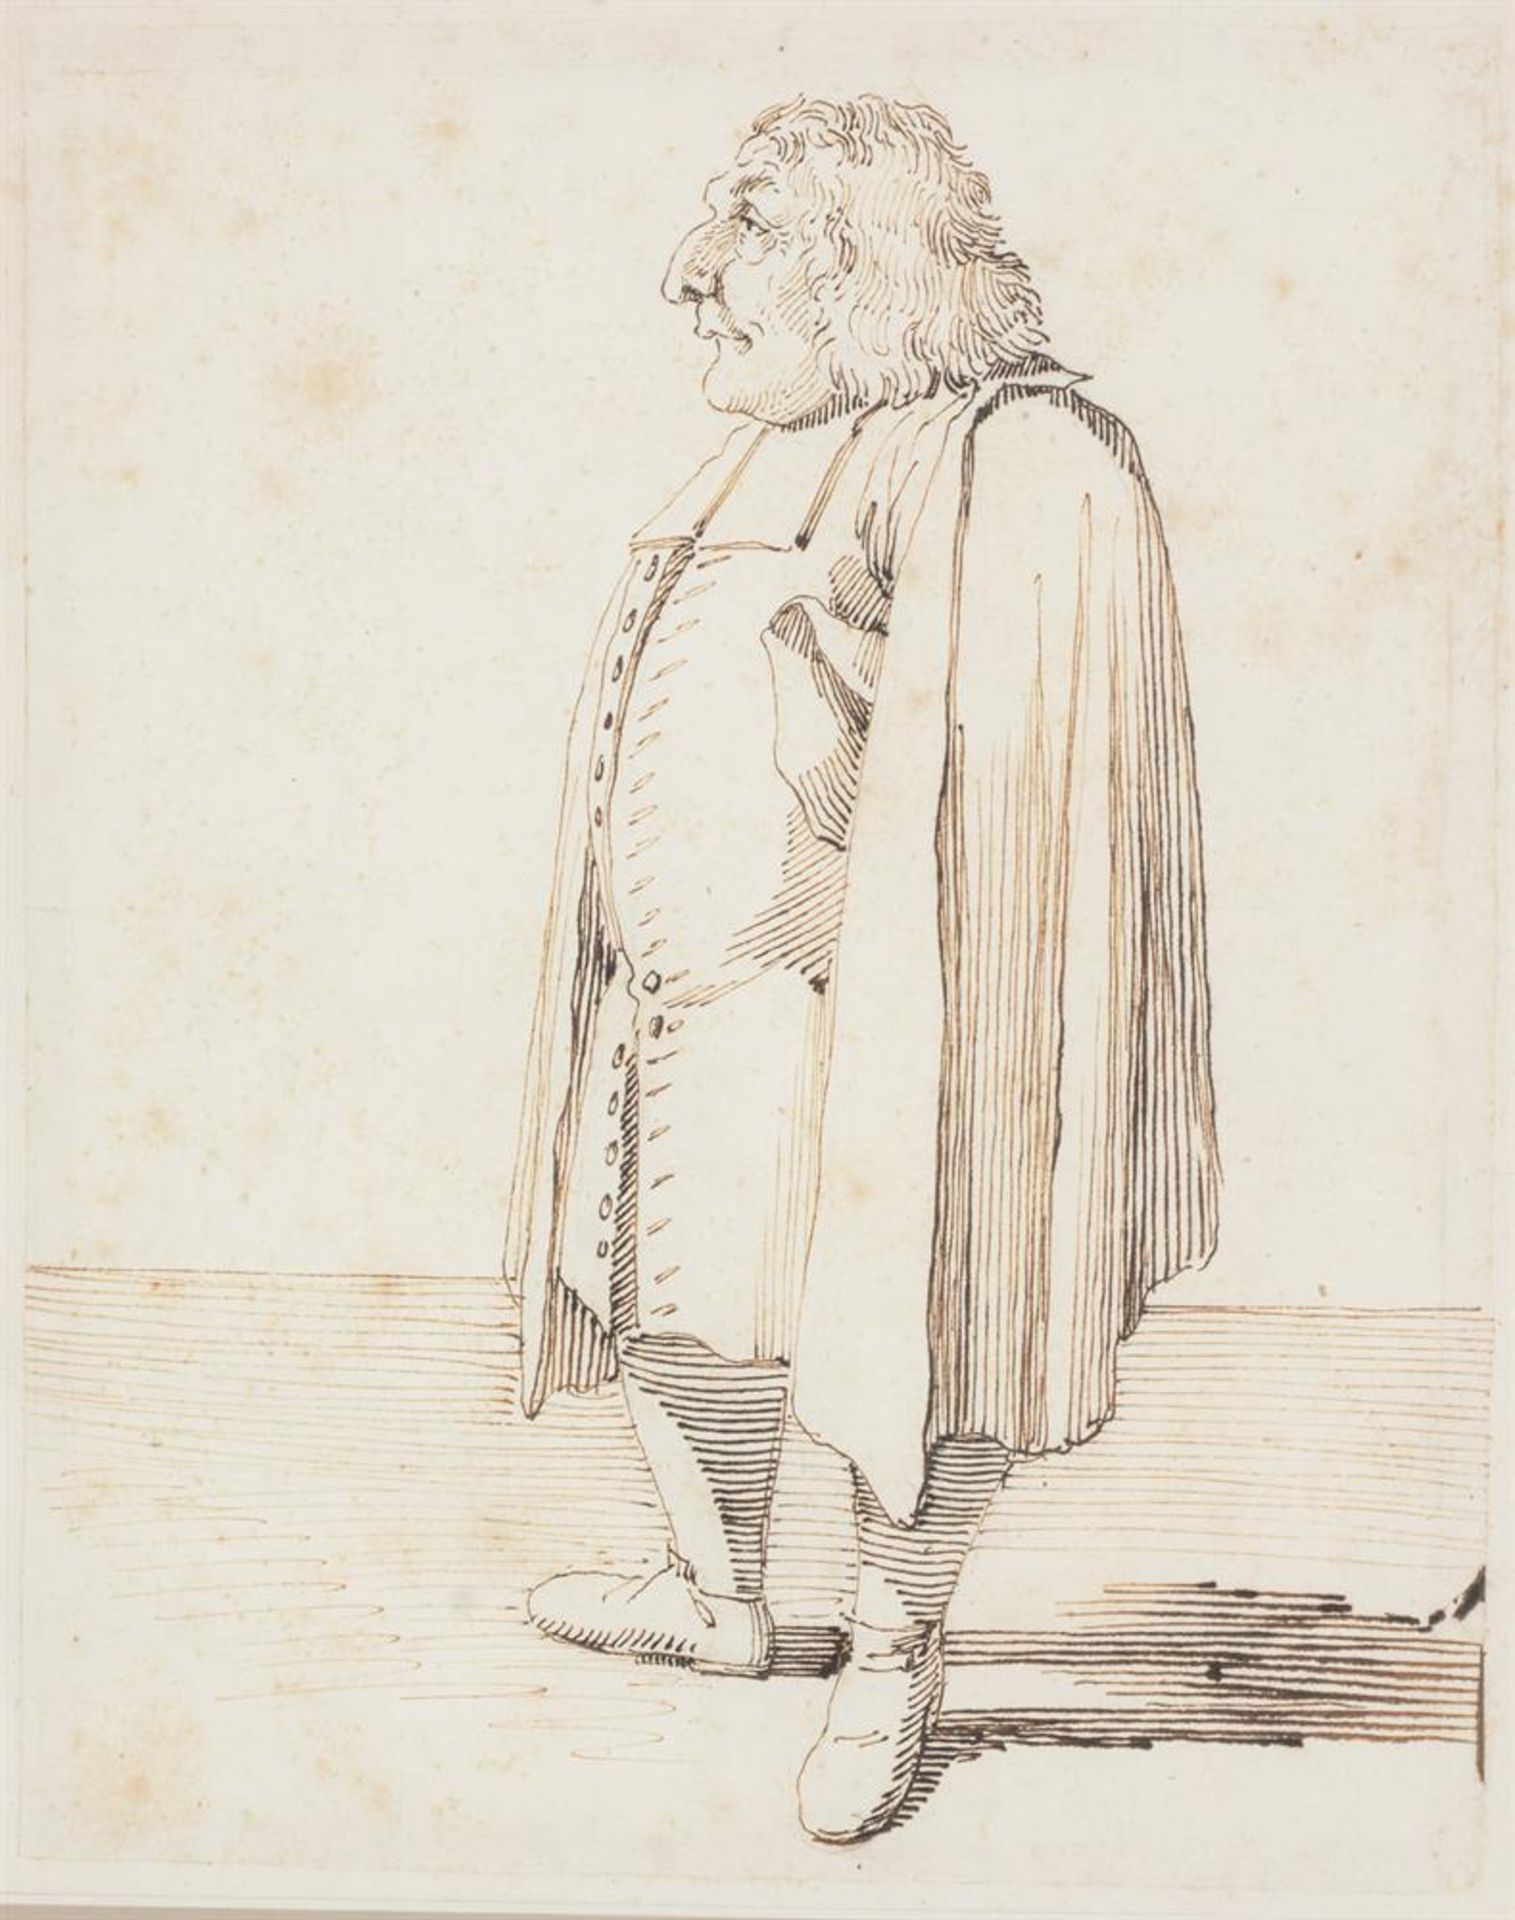 PIER LEONE GHEZZI (ITALIAN 1674-1755), SIXTEEN CARICATURES OF ARISTOCRATS, CLERICS AND TRAVELLERS - Image 8 of 48